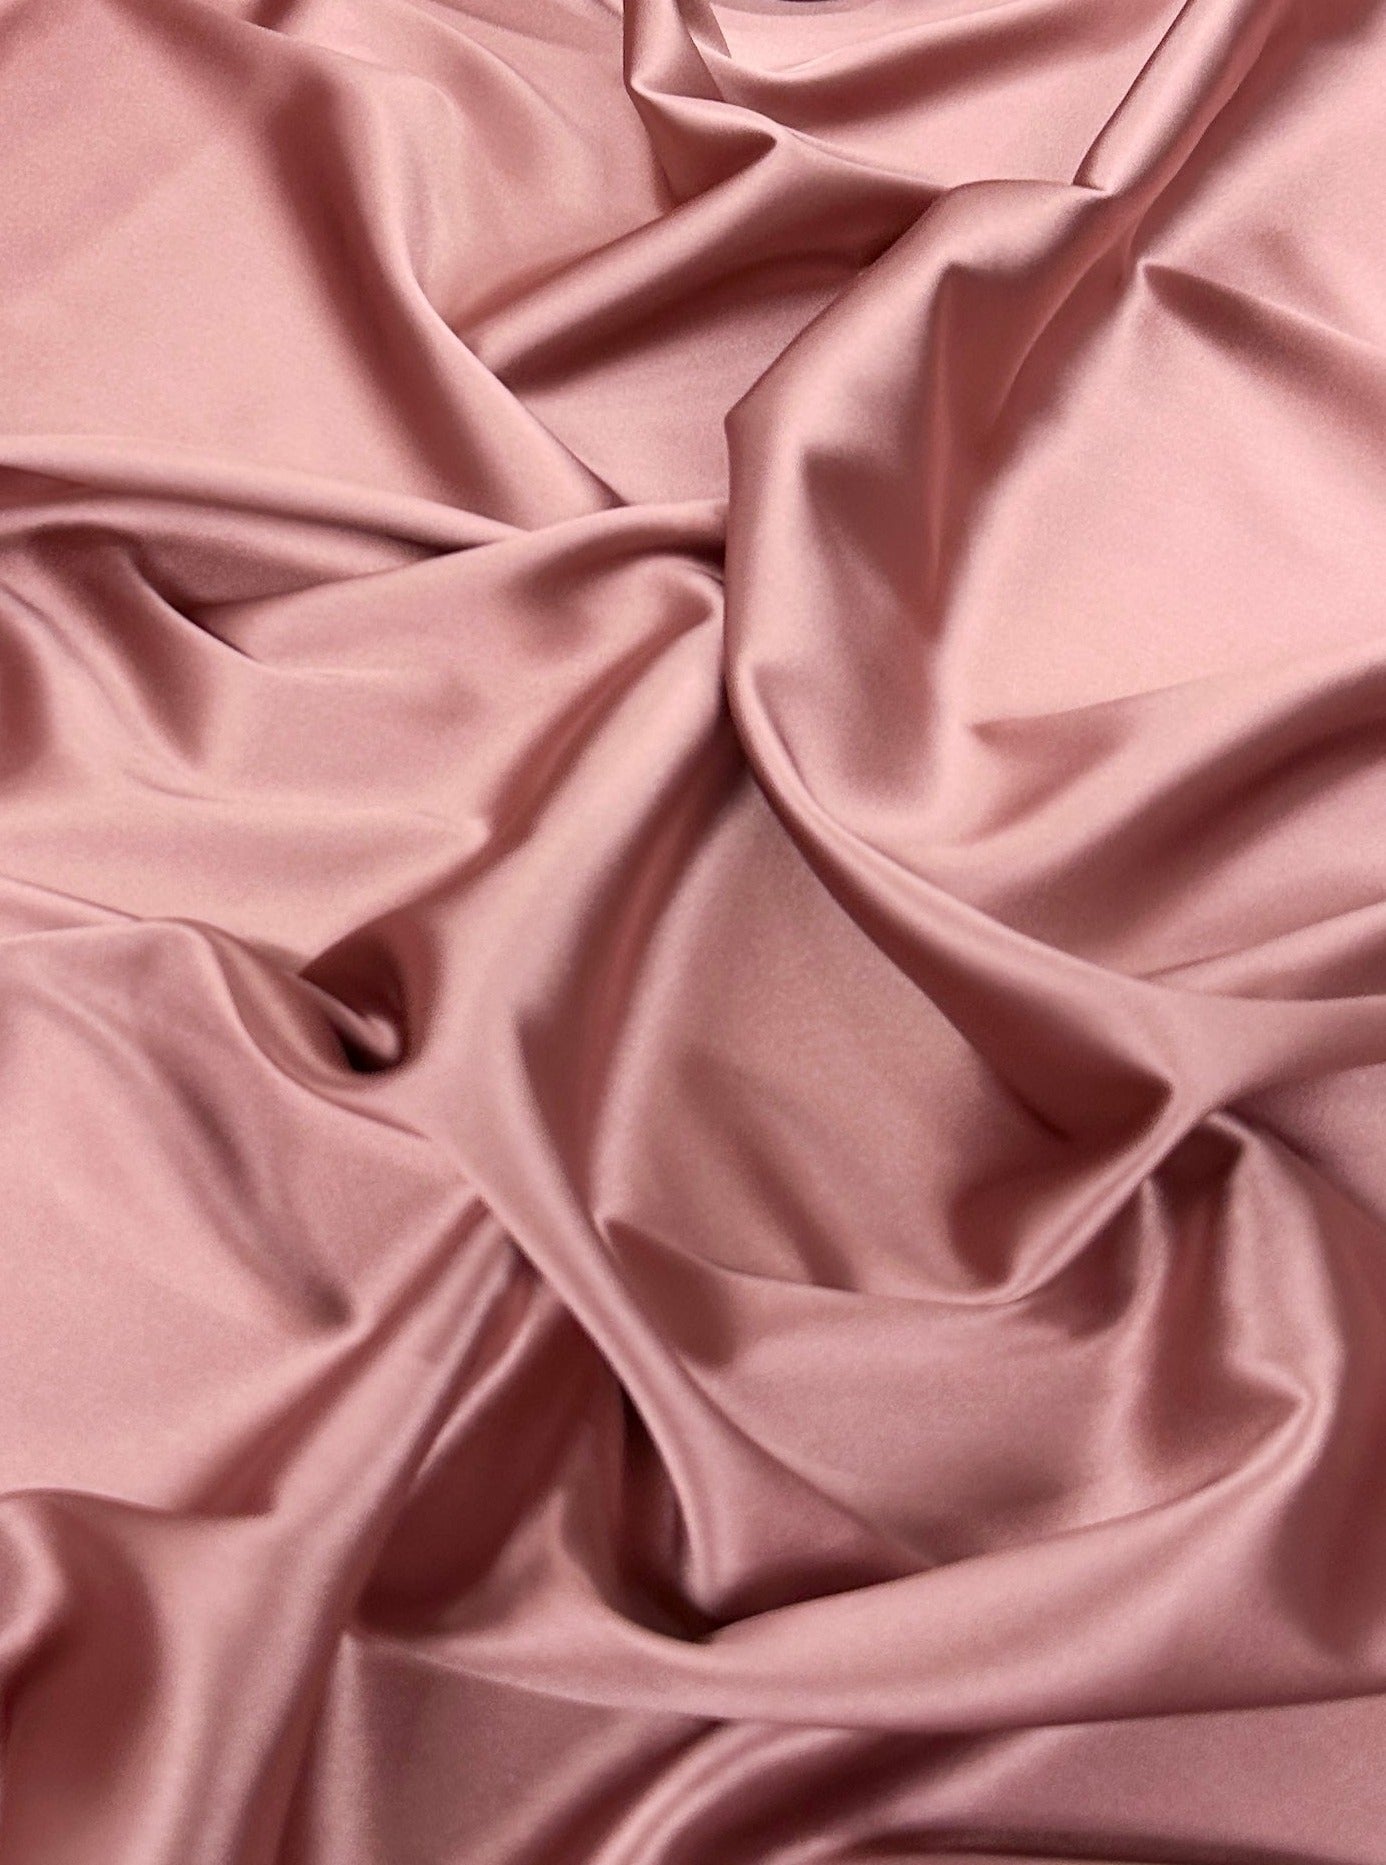 shiny silk fabric, solid silk, solid satin, stretch silk charmeuse, silk fabric by the yard, natural silk, pure silk, 100% pure silk, natural fabric, kiki textiles, online fabric store usa, luxurious fabric, silk satin online, fancy silk, soft silk, smooth silk, 100% natural silk, charmeuse satin, pink natural silk, pink silk, rusty rose natural silk, rusty rose silk, pink natural stretch silk, pink silk, baby pink silk, pink silk satin, light pink silk